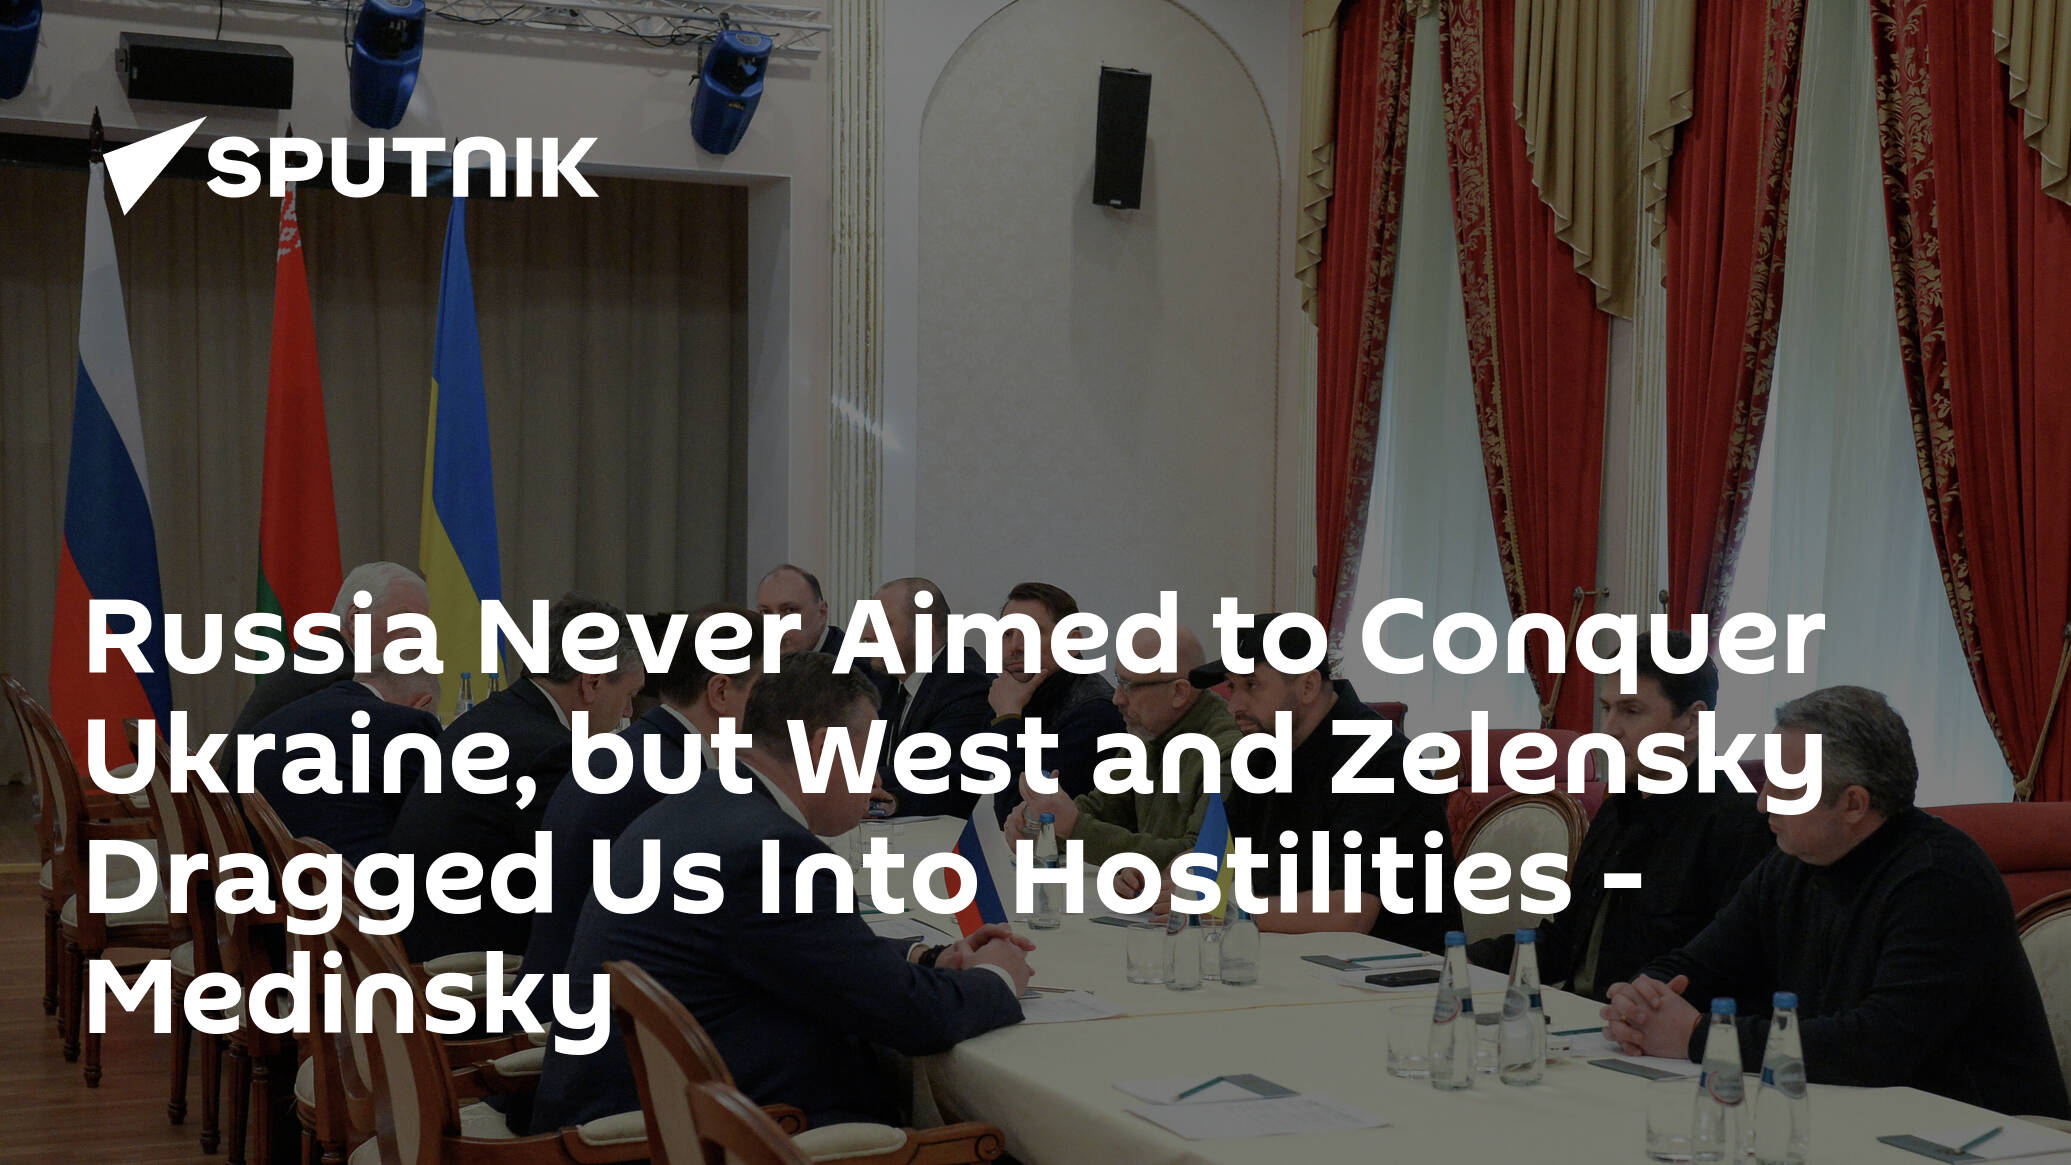 Russia Never Aimed to Conquer Ukraine, but West and Zelensky Dragged Us Into Hostilities – Medinsky